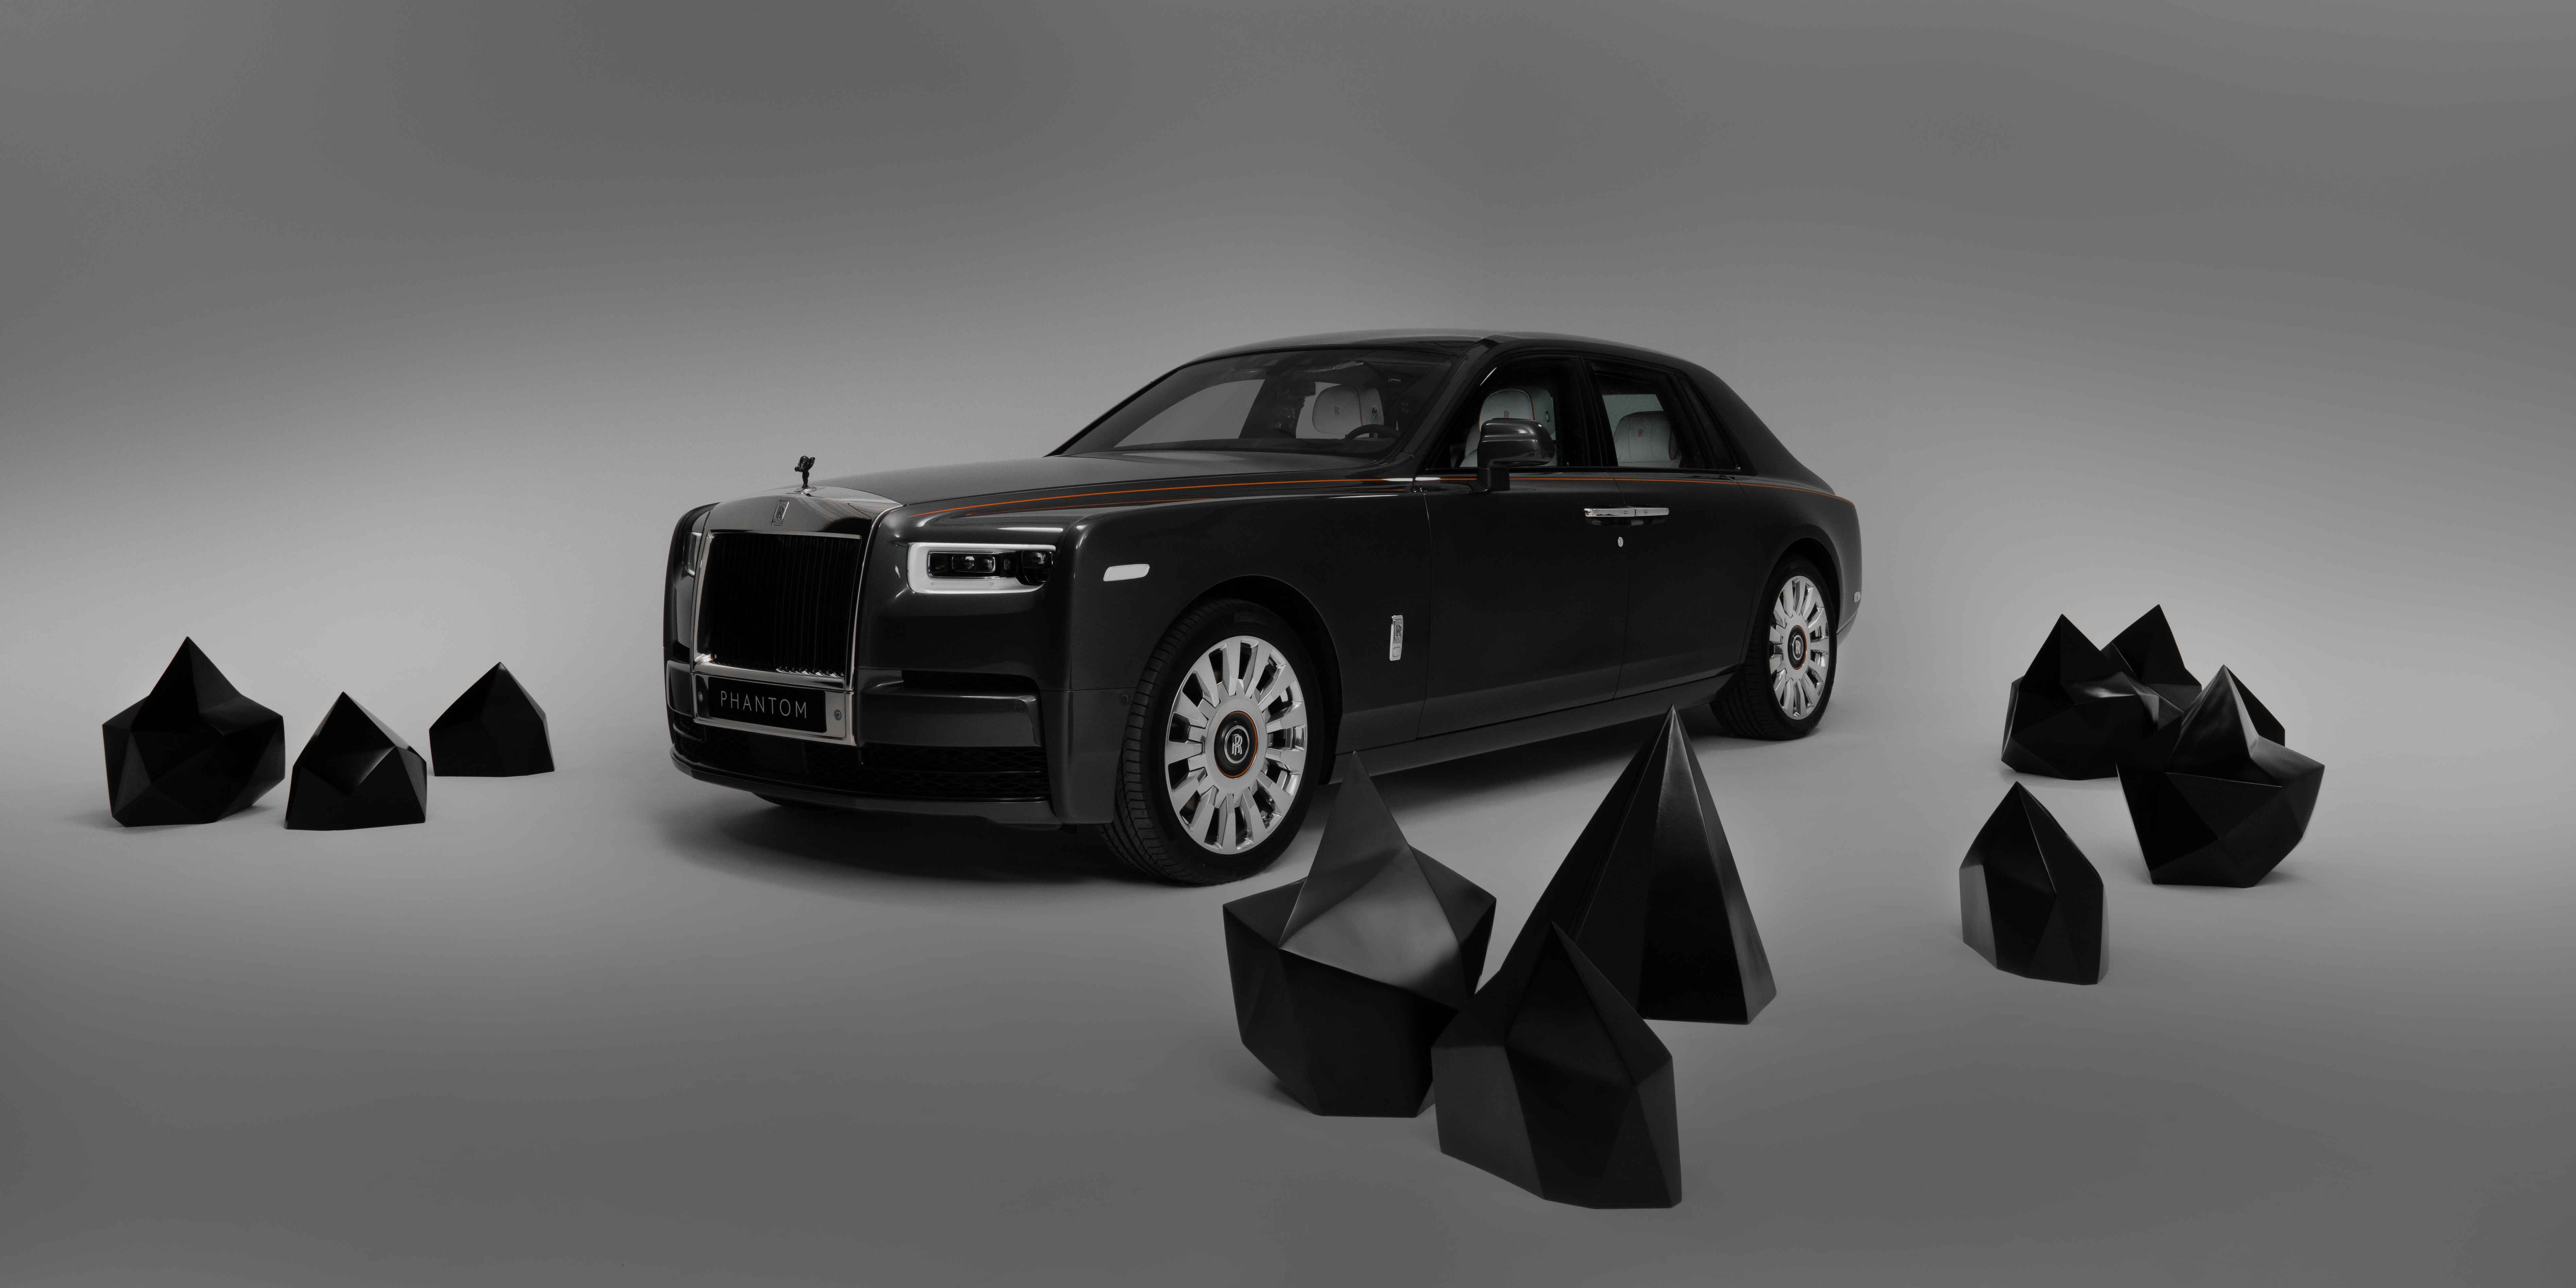 ROLLS-ROYCE SHOWCASES INNOVATIVE ARTWORK WITH THE CARBON VEIL GALLERY